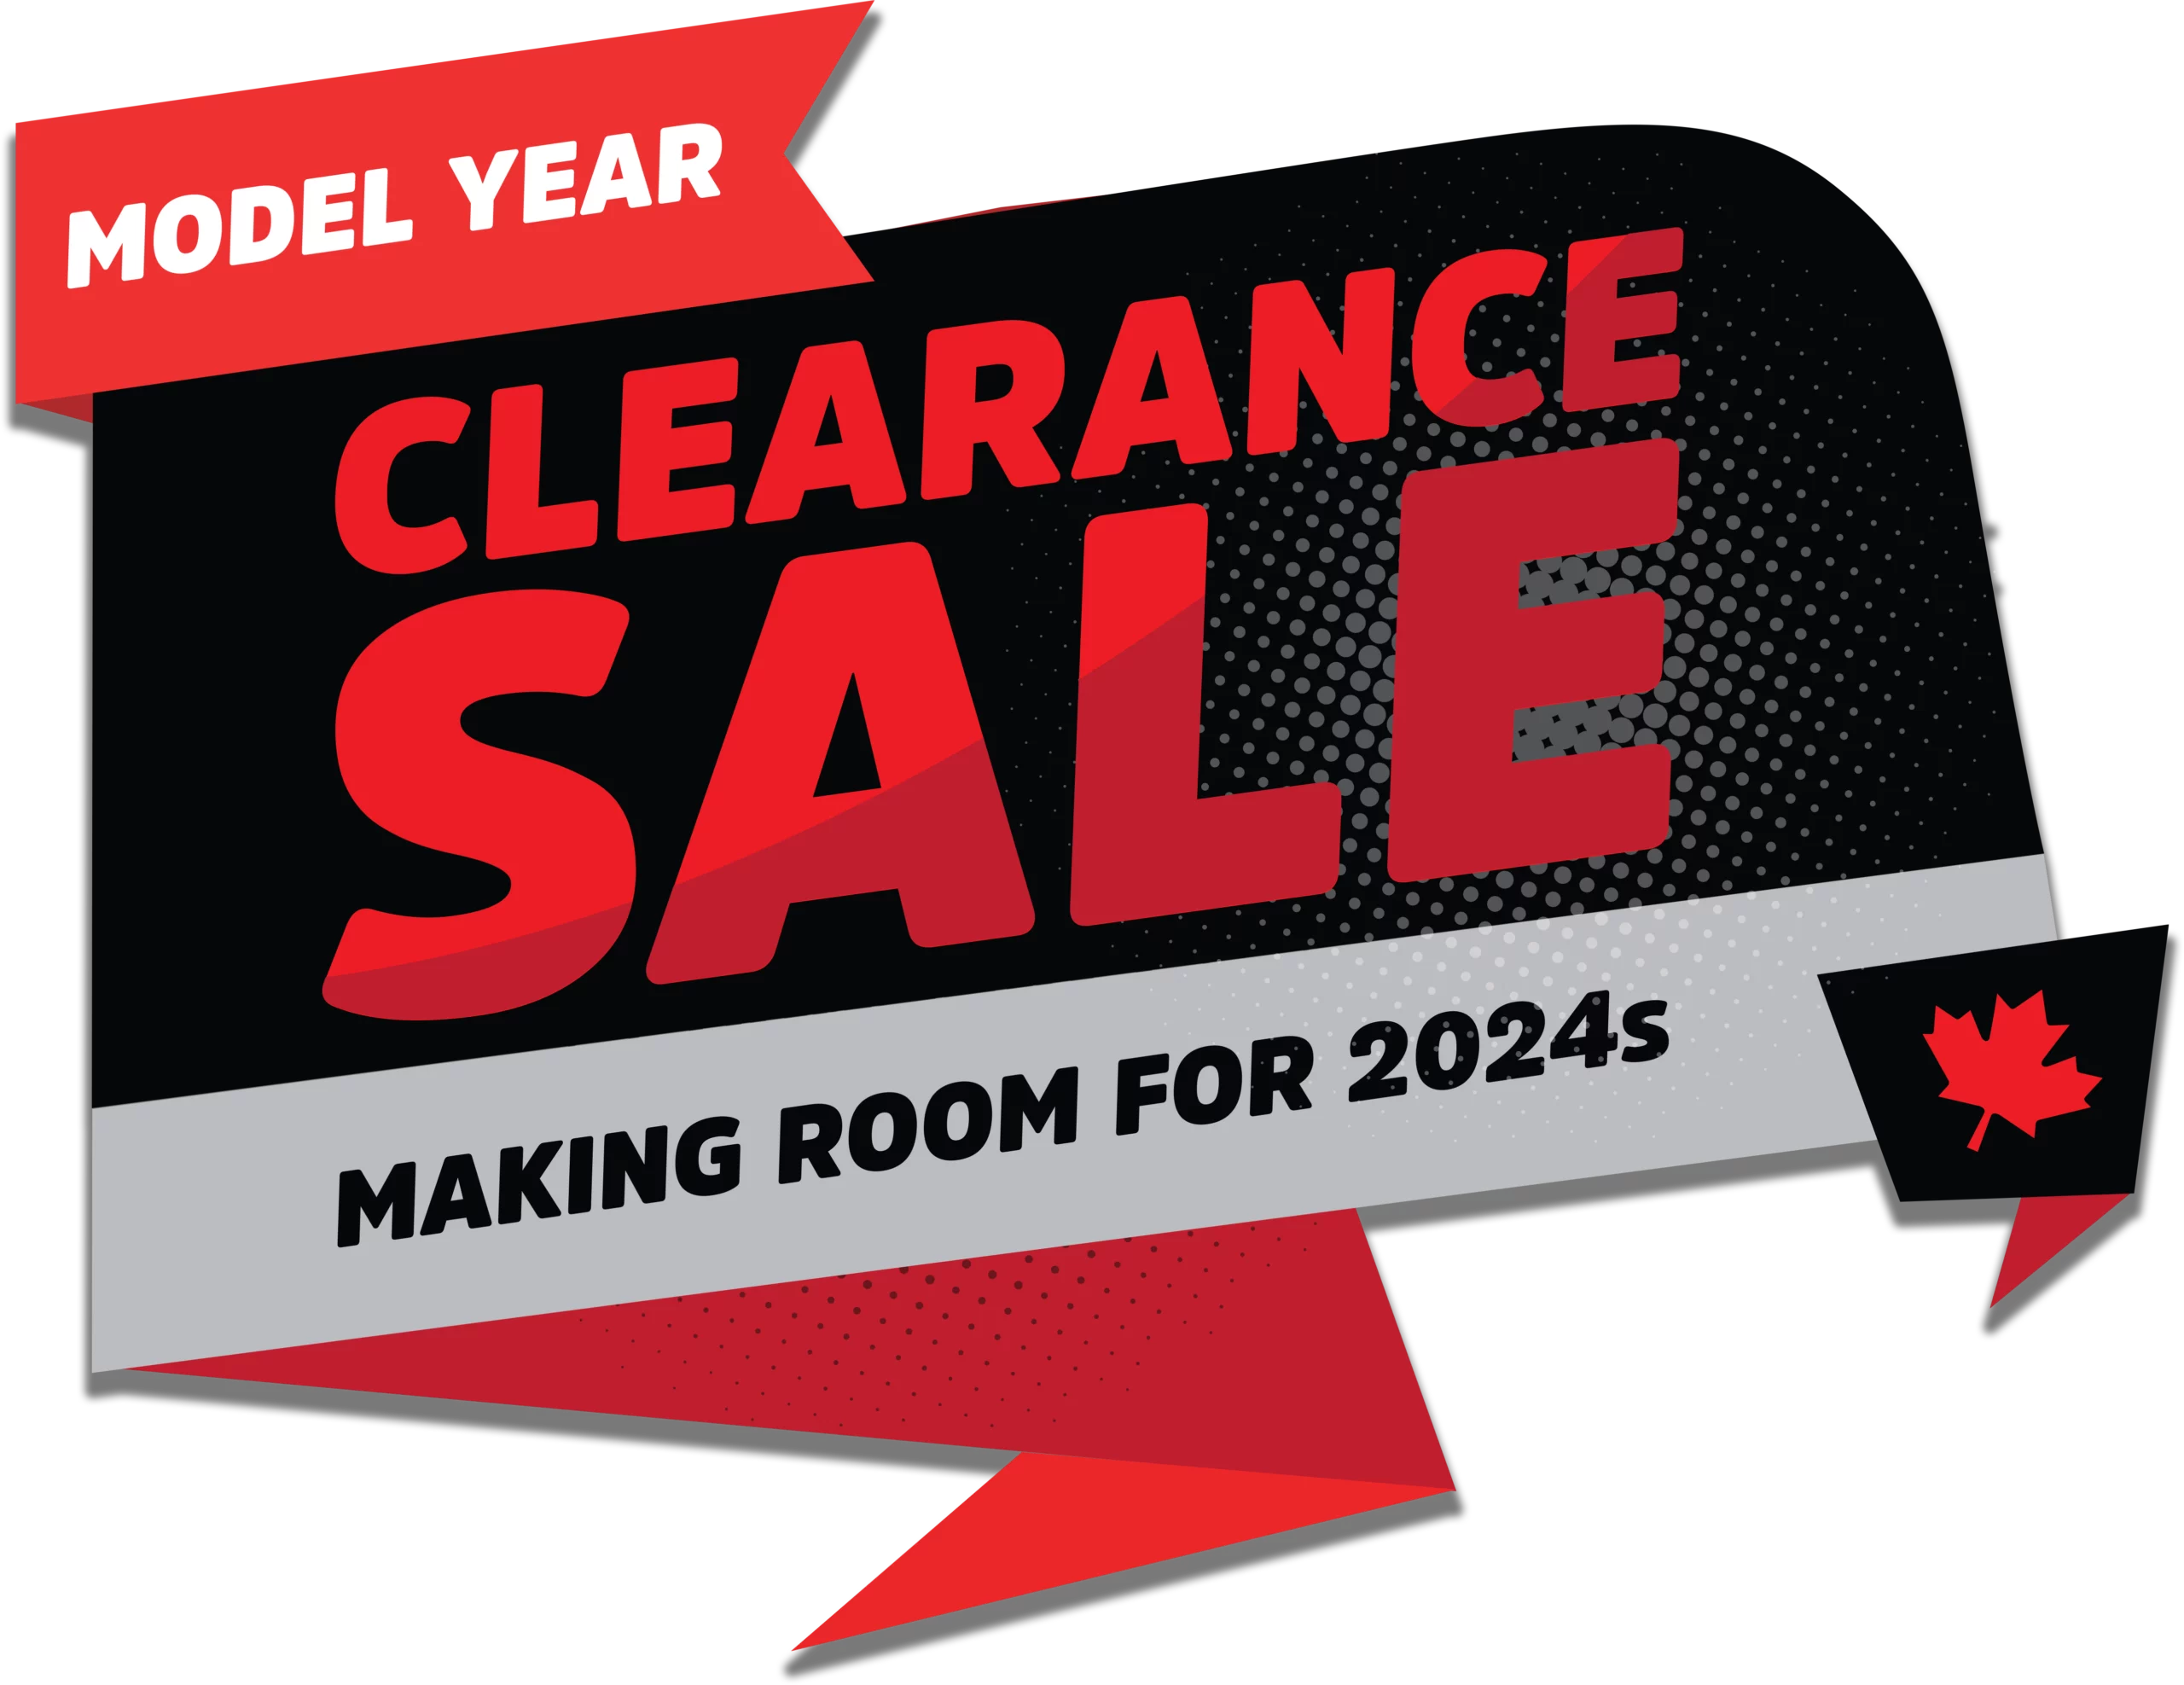 Model Year Clearance Sale